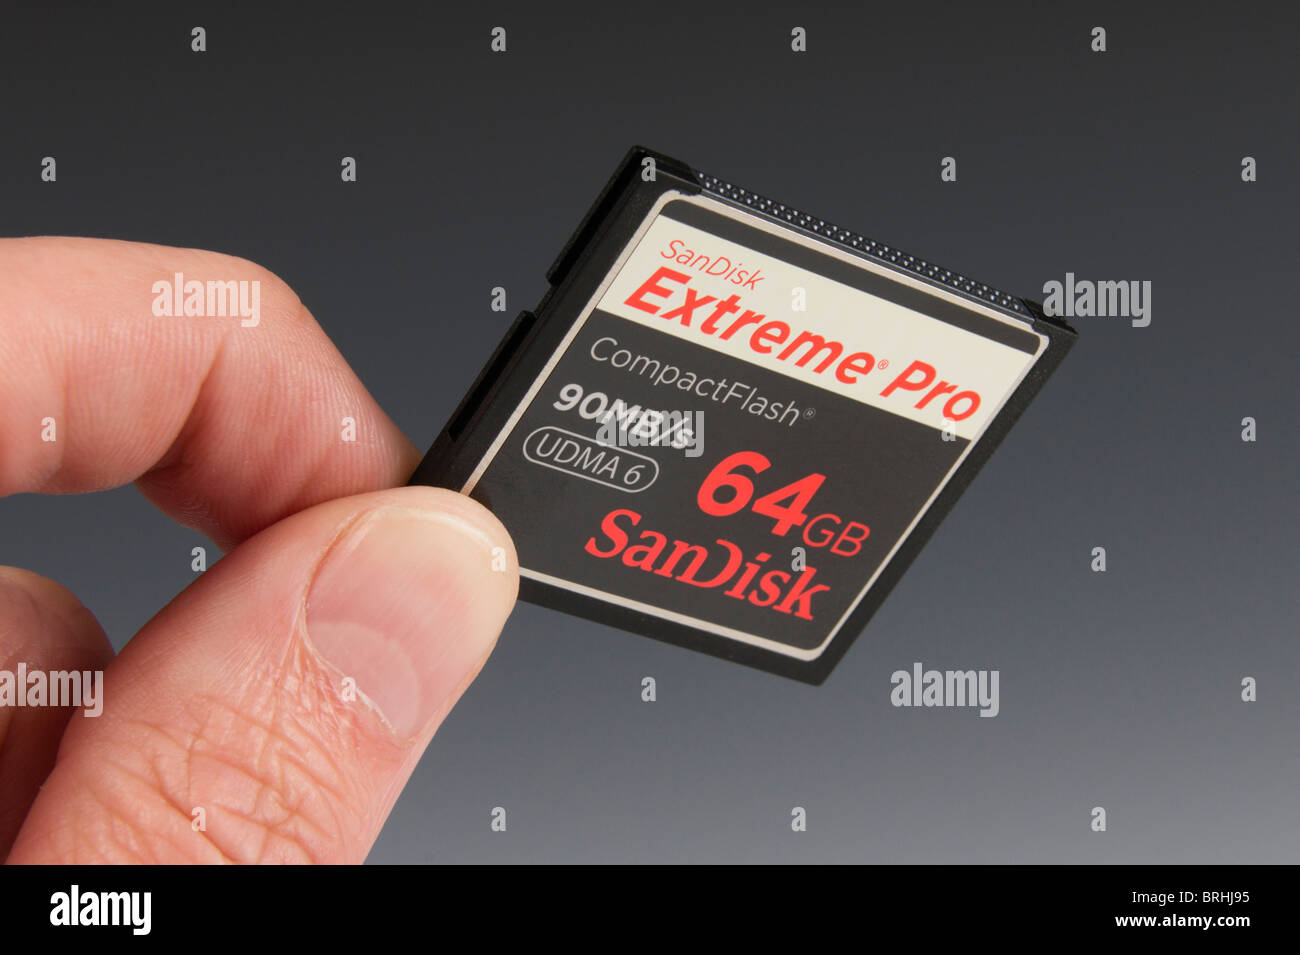 SanDisk Extreme Pro 64GB CompactFlash memory card from 2010 - 90 MB/s was  one of the highest speeds, 64GB one of largest capacities Stock Photo -  Alamy